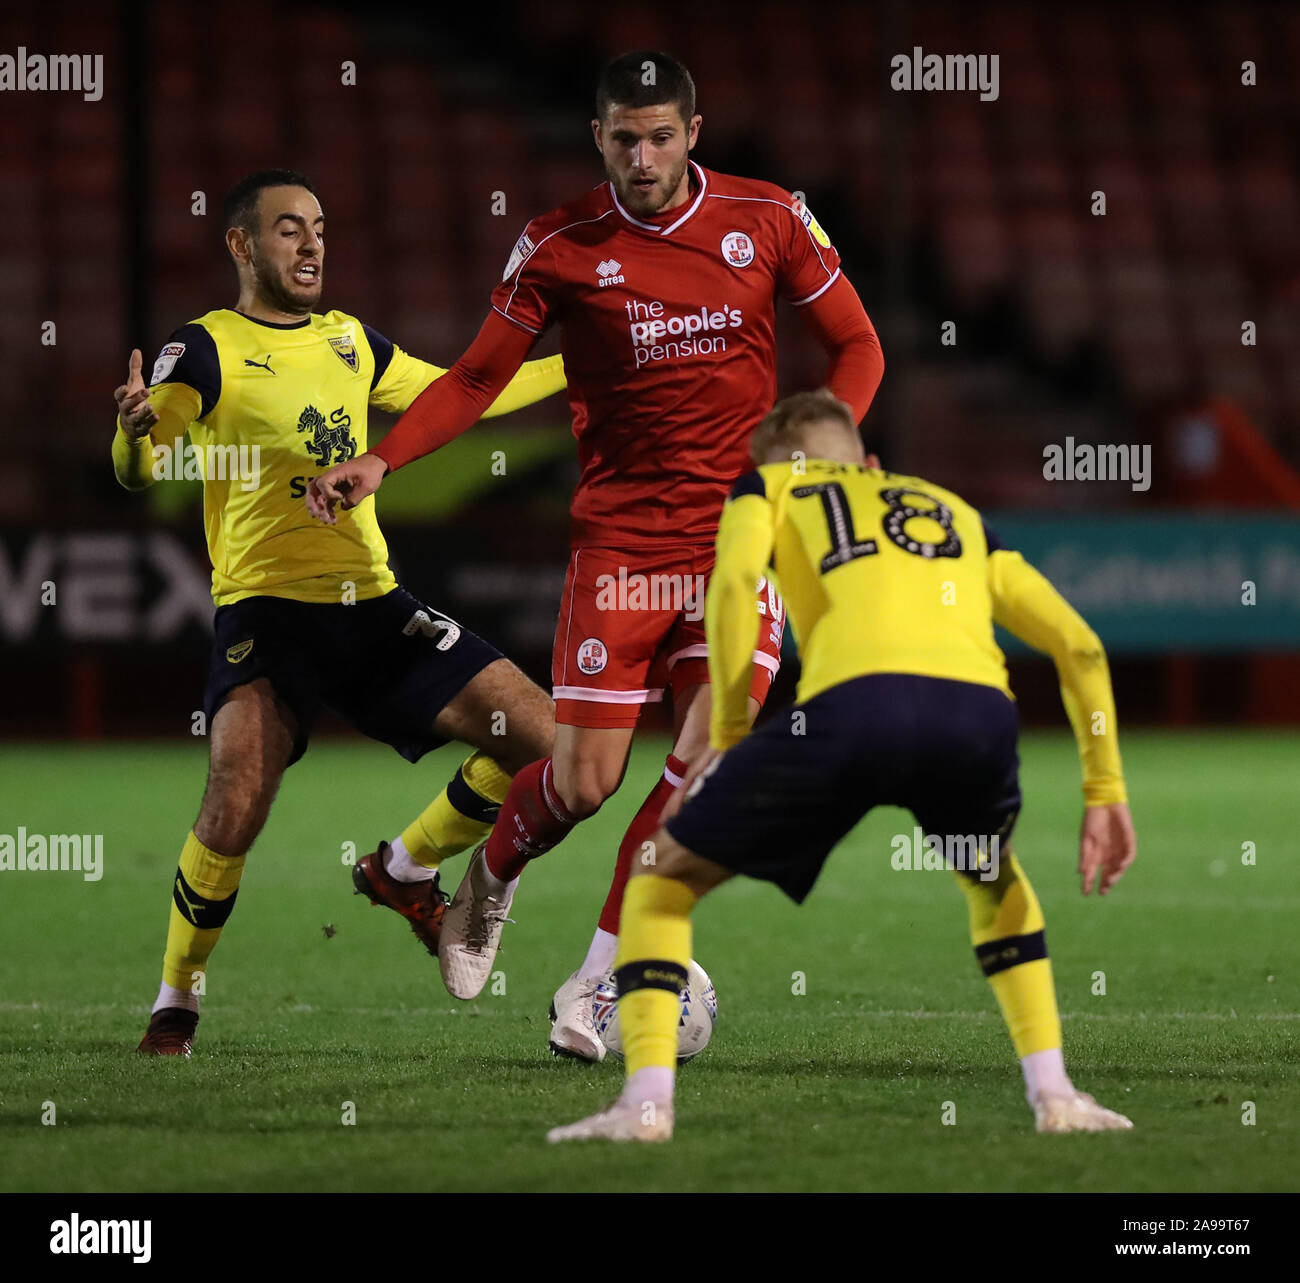 Crawley Town's Jamie Sendles-White  vies for the ball against Oxford's Mark Sykes during the Leasing.com Trophy match between Crawley Town and Oxford United at the Peoples Pension Stadium in Crawley. 12 November 2019 Stock Photo